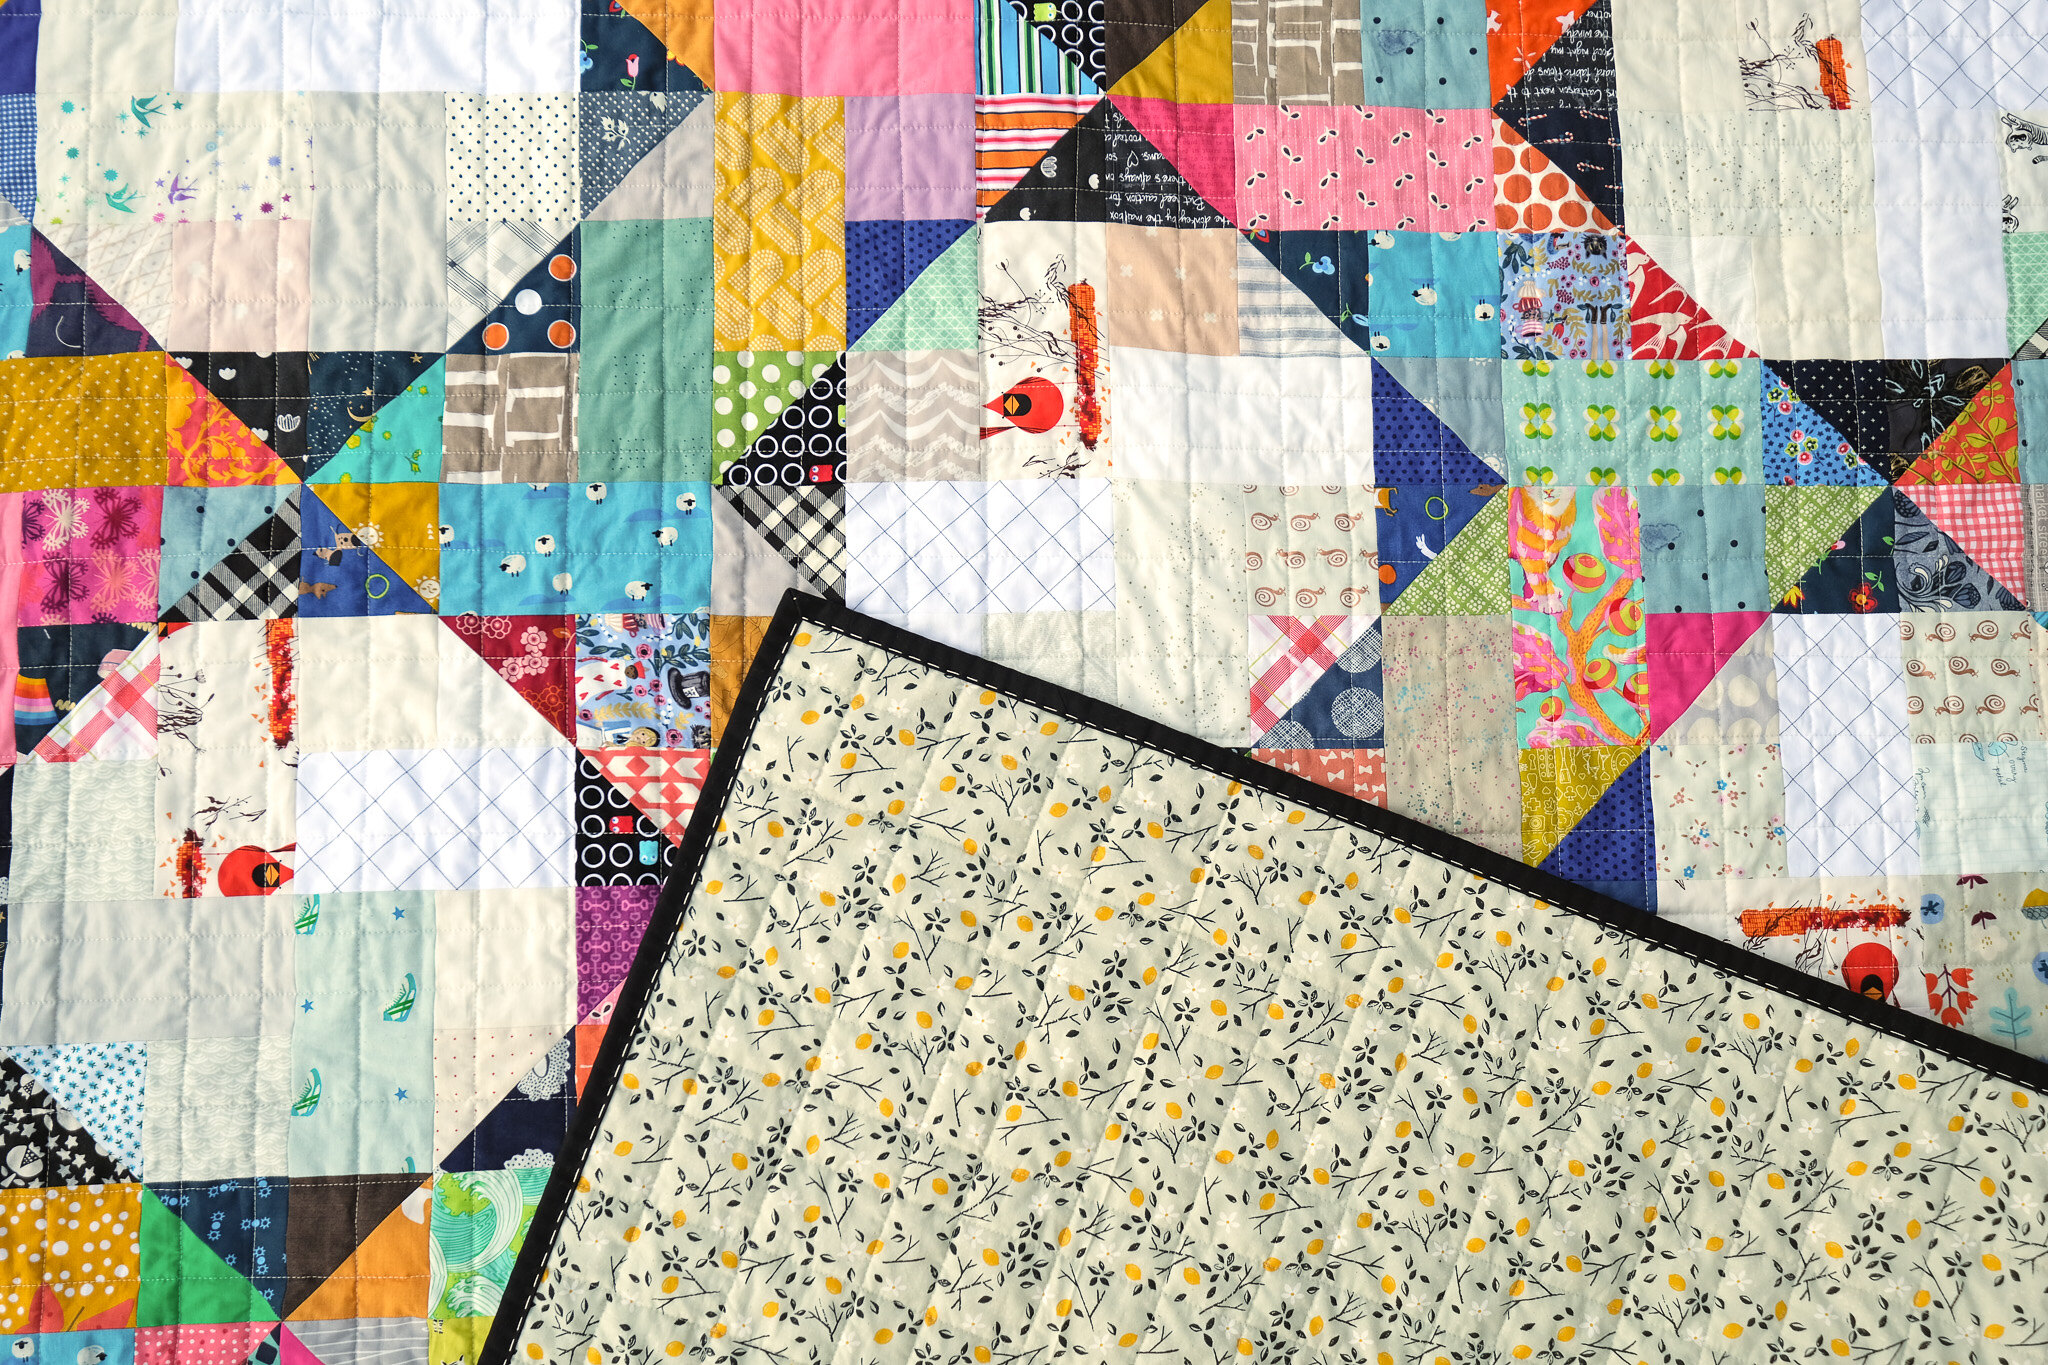 The Gracie Quilt - Kitchen Table Quilting